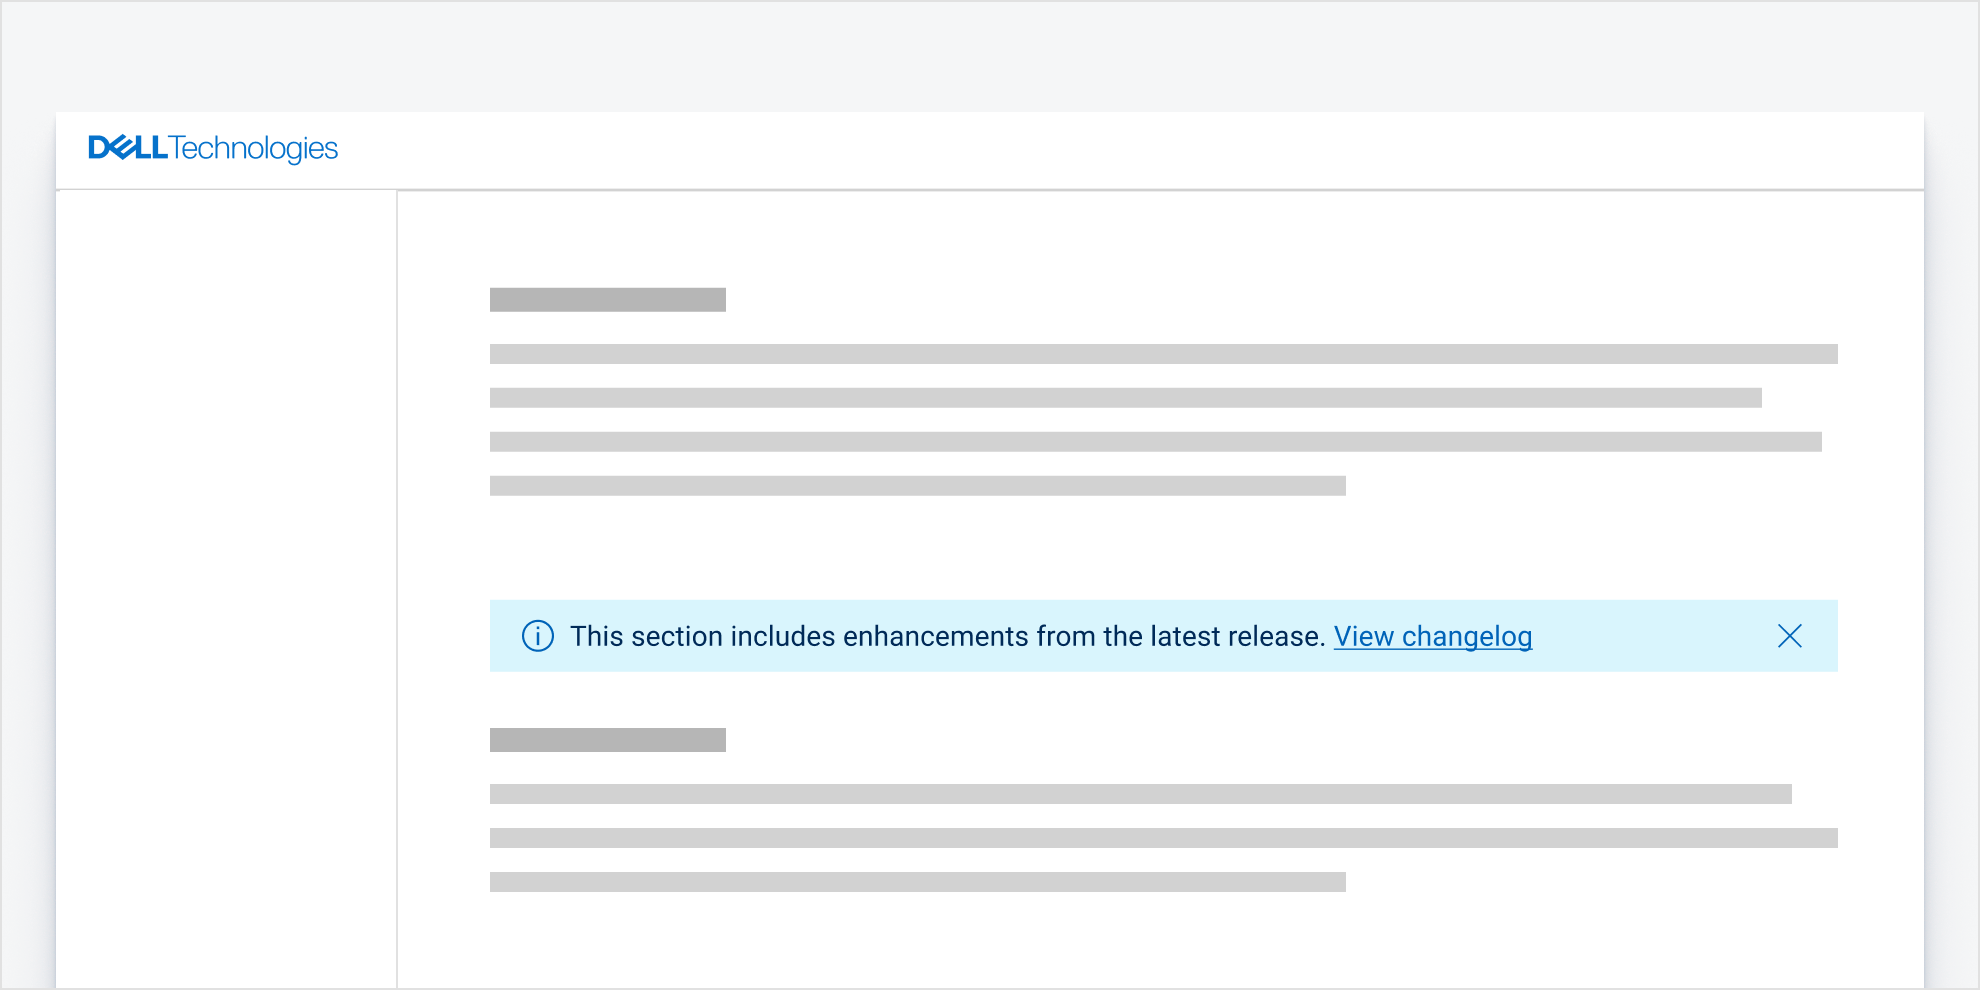 Contextual message bar within a documentation reads, “This section includes enhancements from the latest release.” Link shown: “View changelog”.